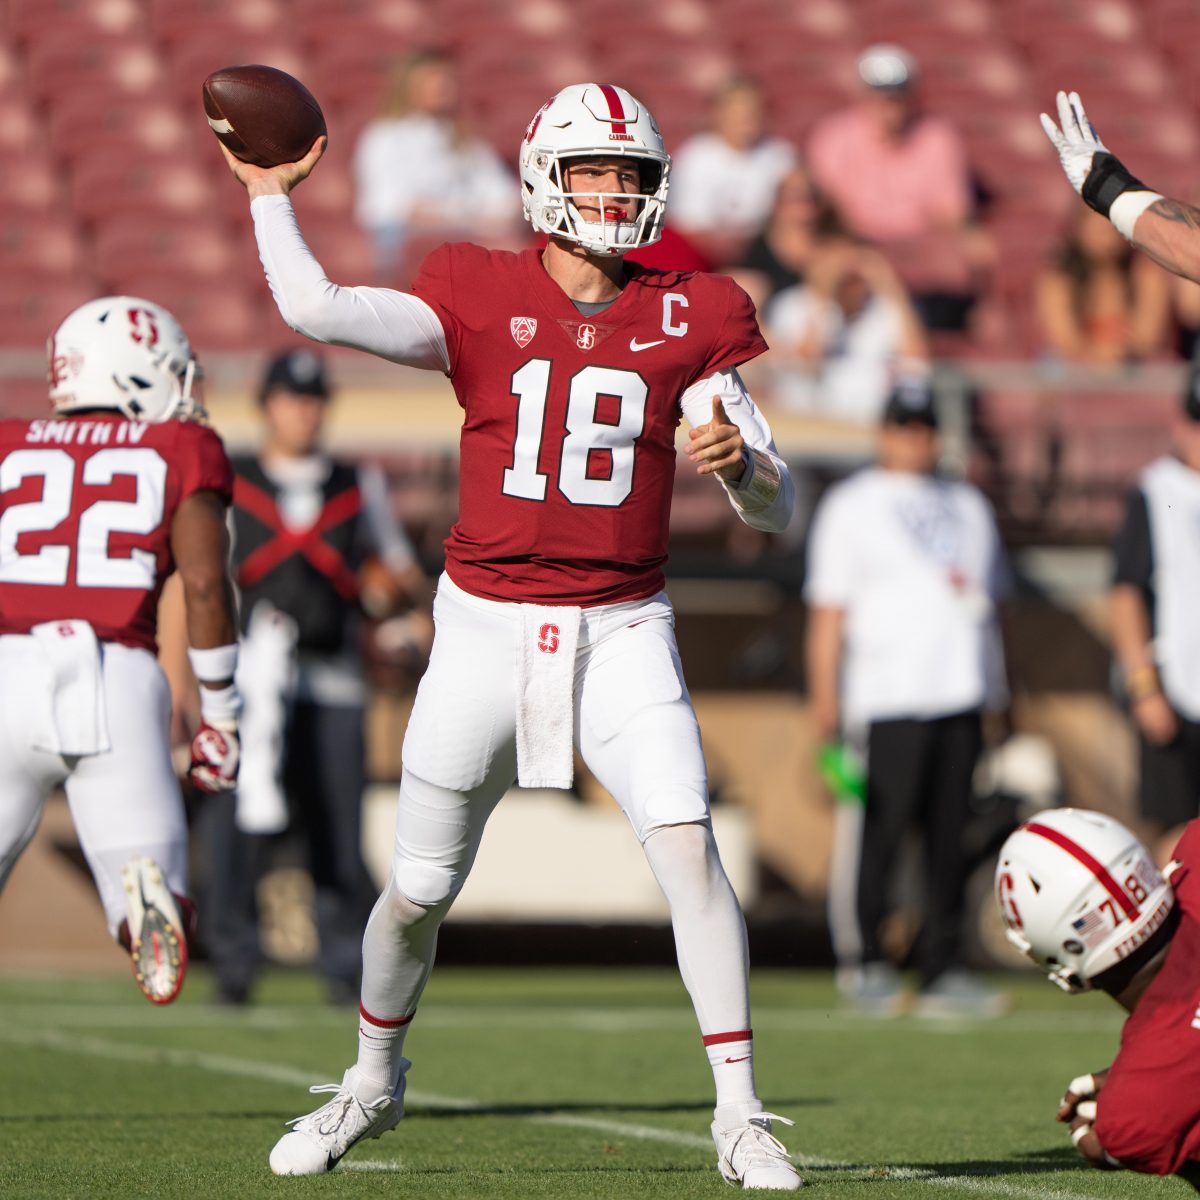 Southern California (USC) vs. Stanford Prediction, Preview, and Odds - 9-10-2022